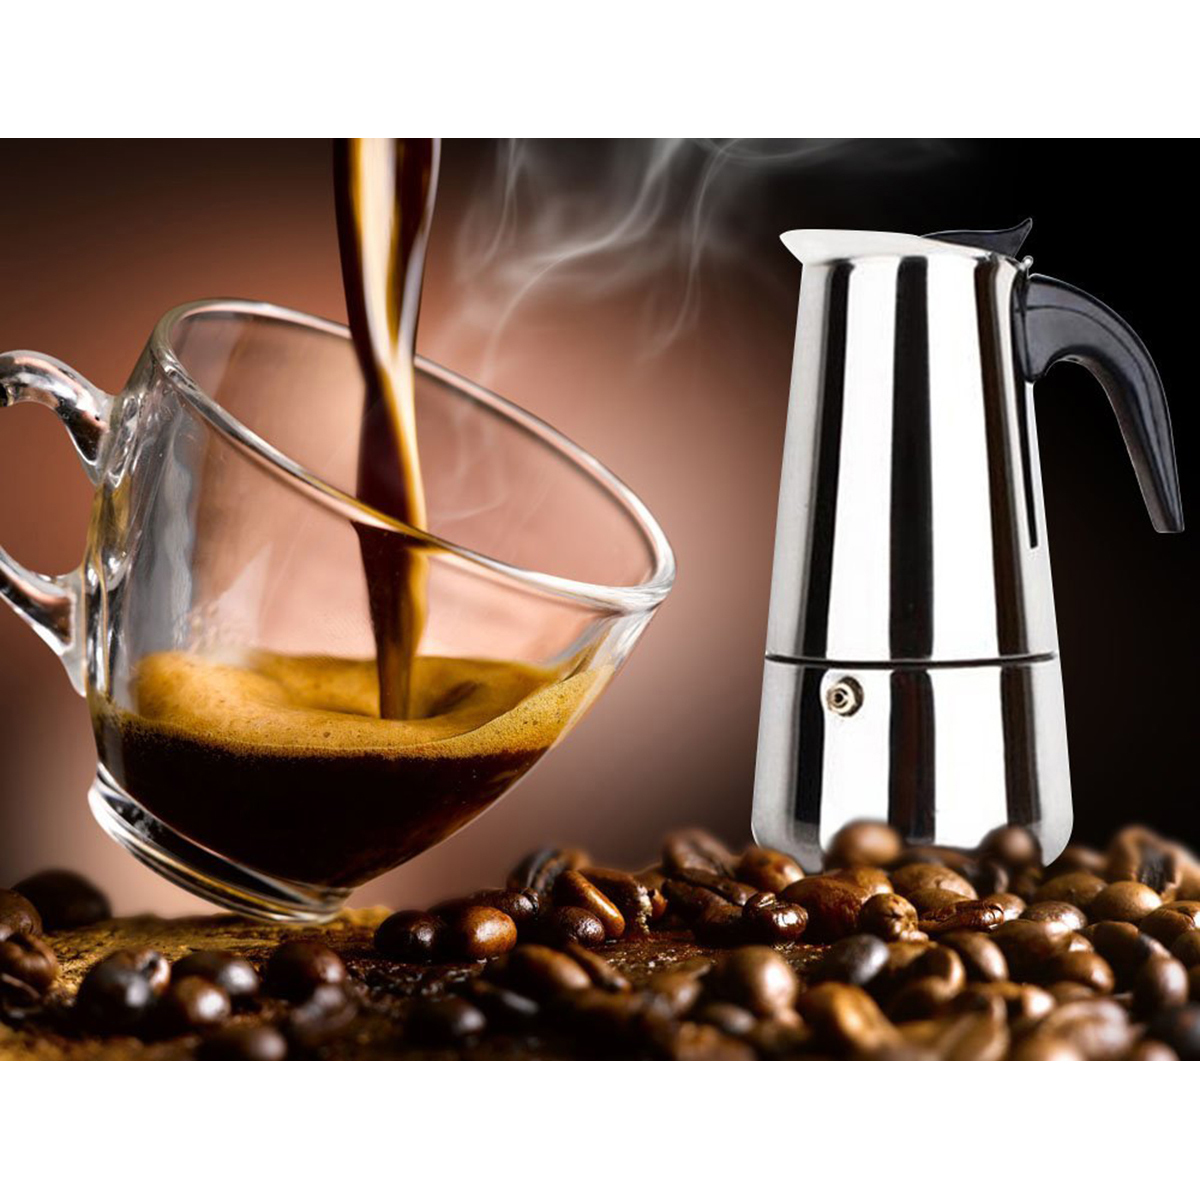 Espresso Moka Coffee Maker Pot Percolator Stainless Steel Electric Stove Electric Coffee Kettle 30